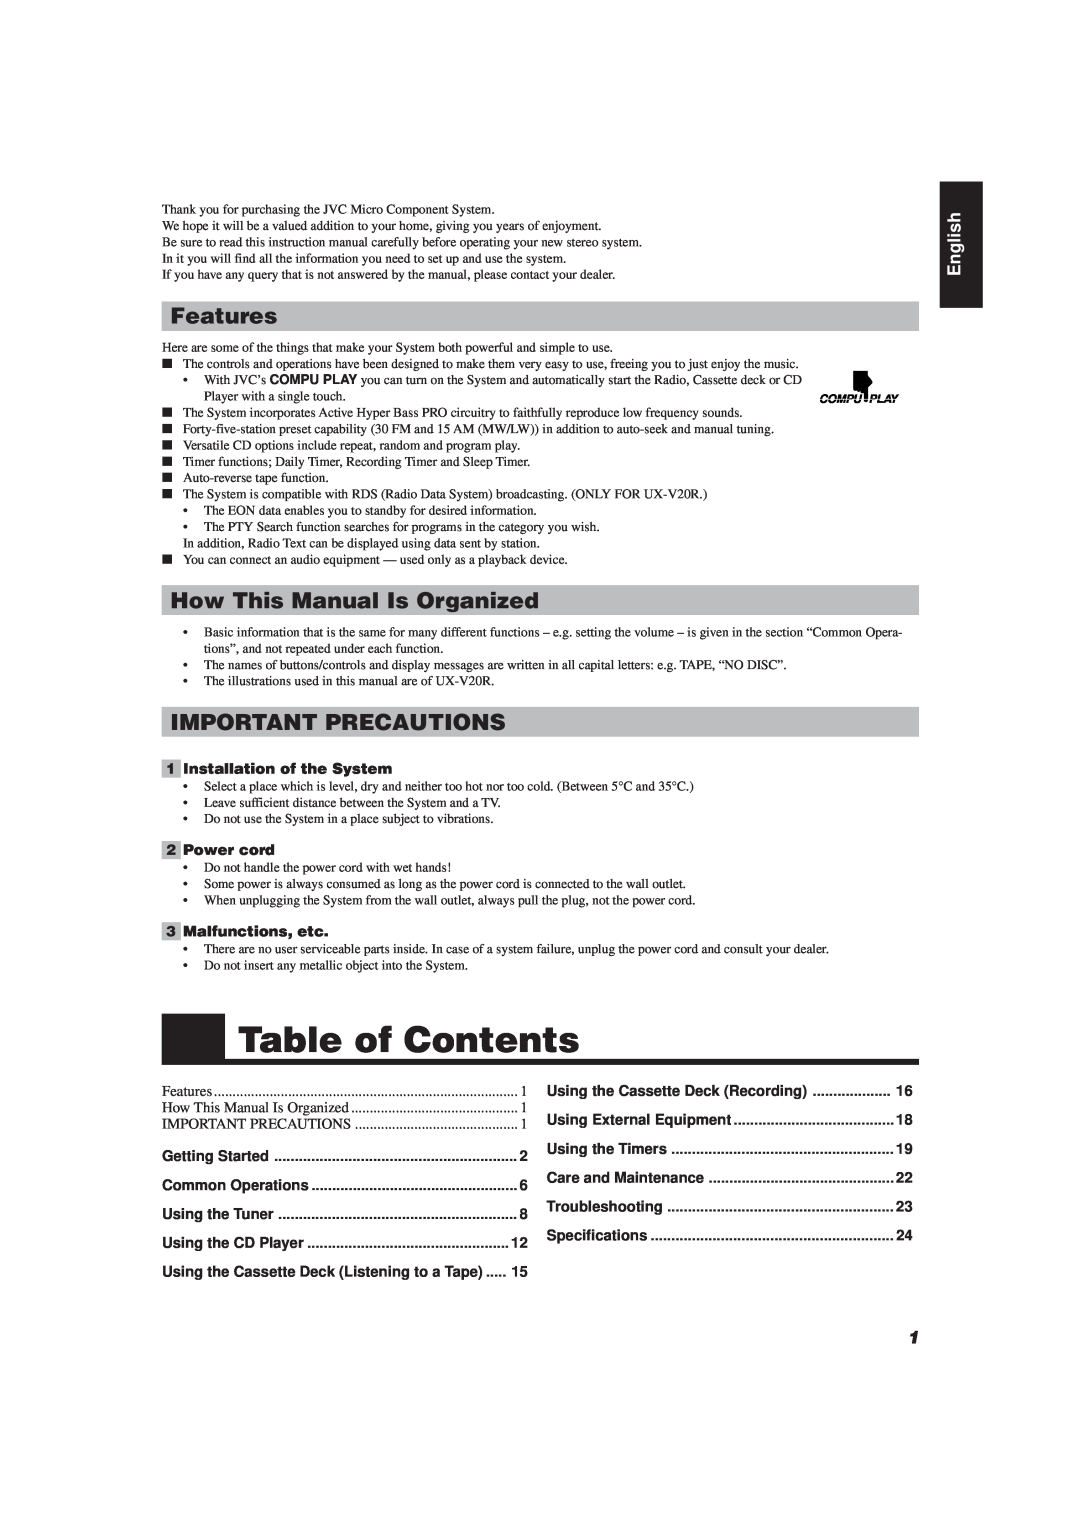 JVC UX-V20R/UX-V10 manual Table of Contents, Features, How This Manual Is Organized, Important Precautions, English 